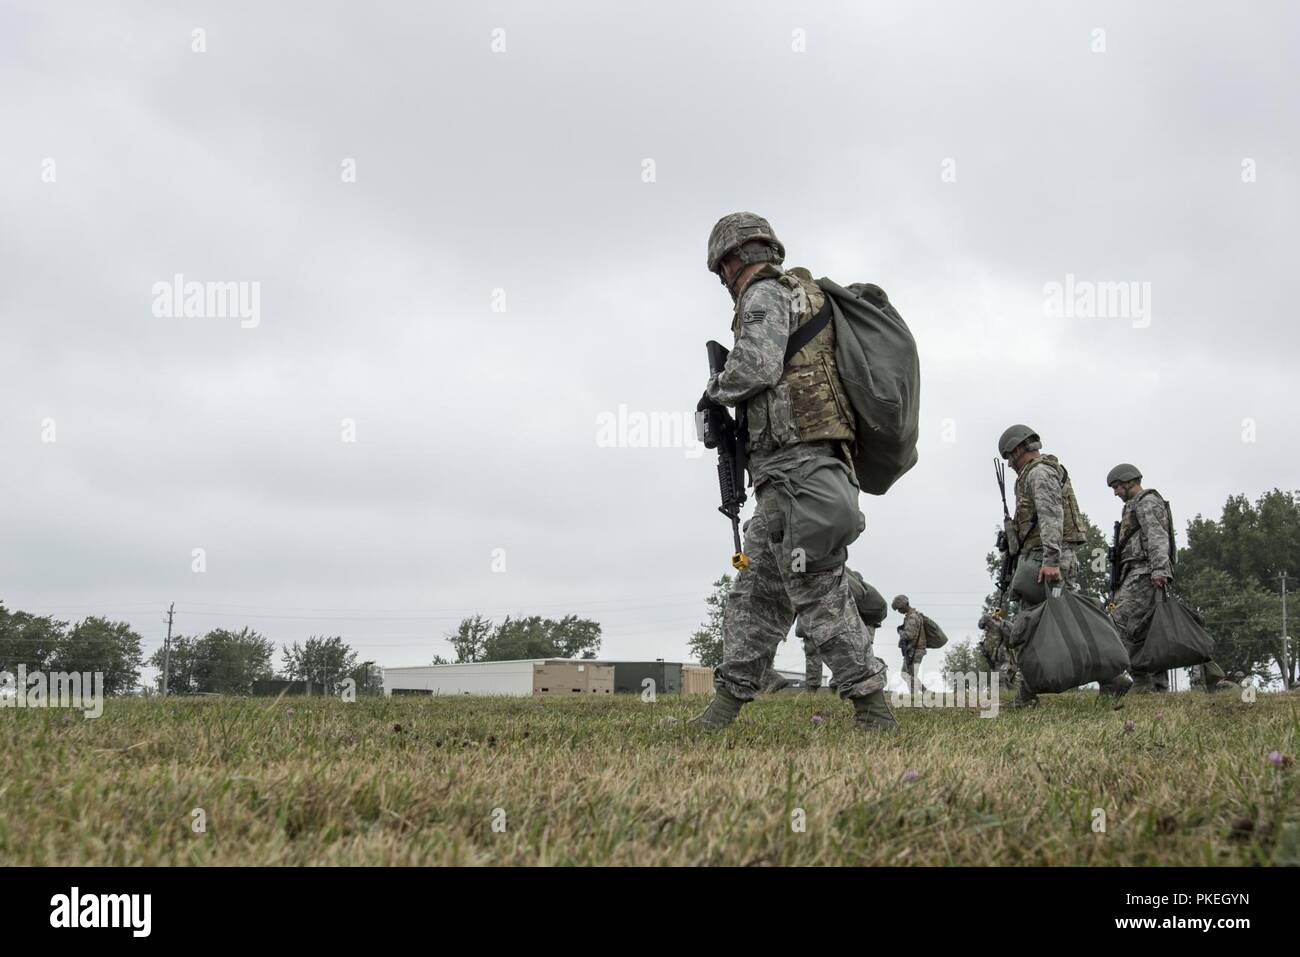 Airmen of the Ohio Air National Guard, 200th RED HORSE Squadron, conduct a multi-day Field Training Exercise at Camp Perry, OH., incorporating construction and civil engineering elements while simulating hostile conditions, Aug. 1, 2018. About 400 Airmen participated in this year's training in support of the RED HORSE mission to provide a dedicated, mobile, flexible, self-sufficient heavy construction engineering force for airfield, base infrastructure and special capabilities to support worldwide contingency operations. Stock Photo